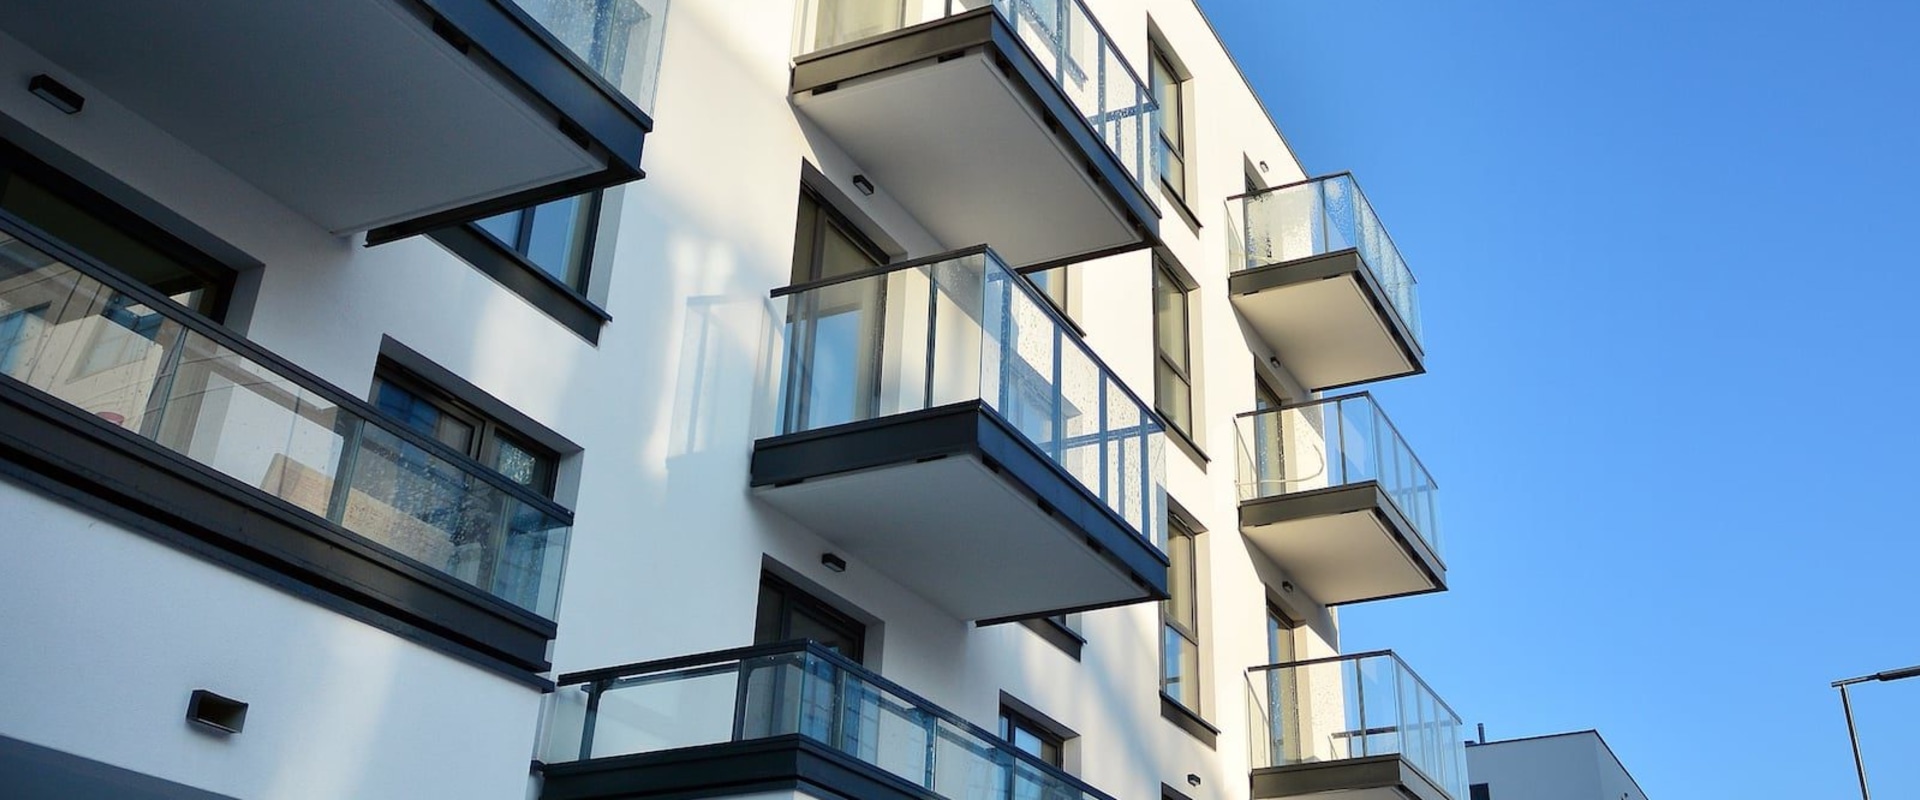 Apartment Investing: What You Need to Know